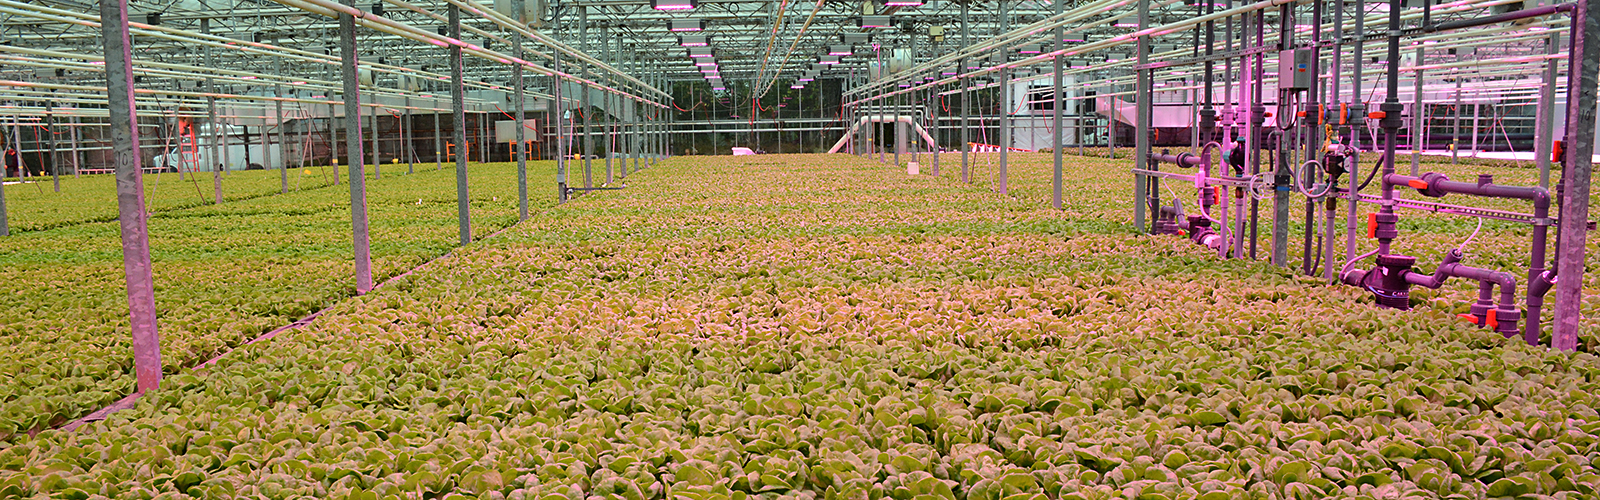 Wheatfield Gardens’ 12.5-acre glasshouse, where the company grows lettuce and medical hemp and researches and validates its patented Controlled Environment Agriculture technologies.